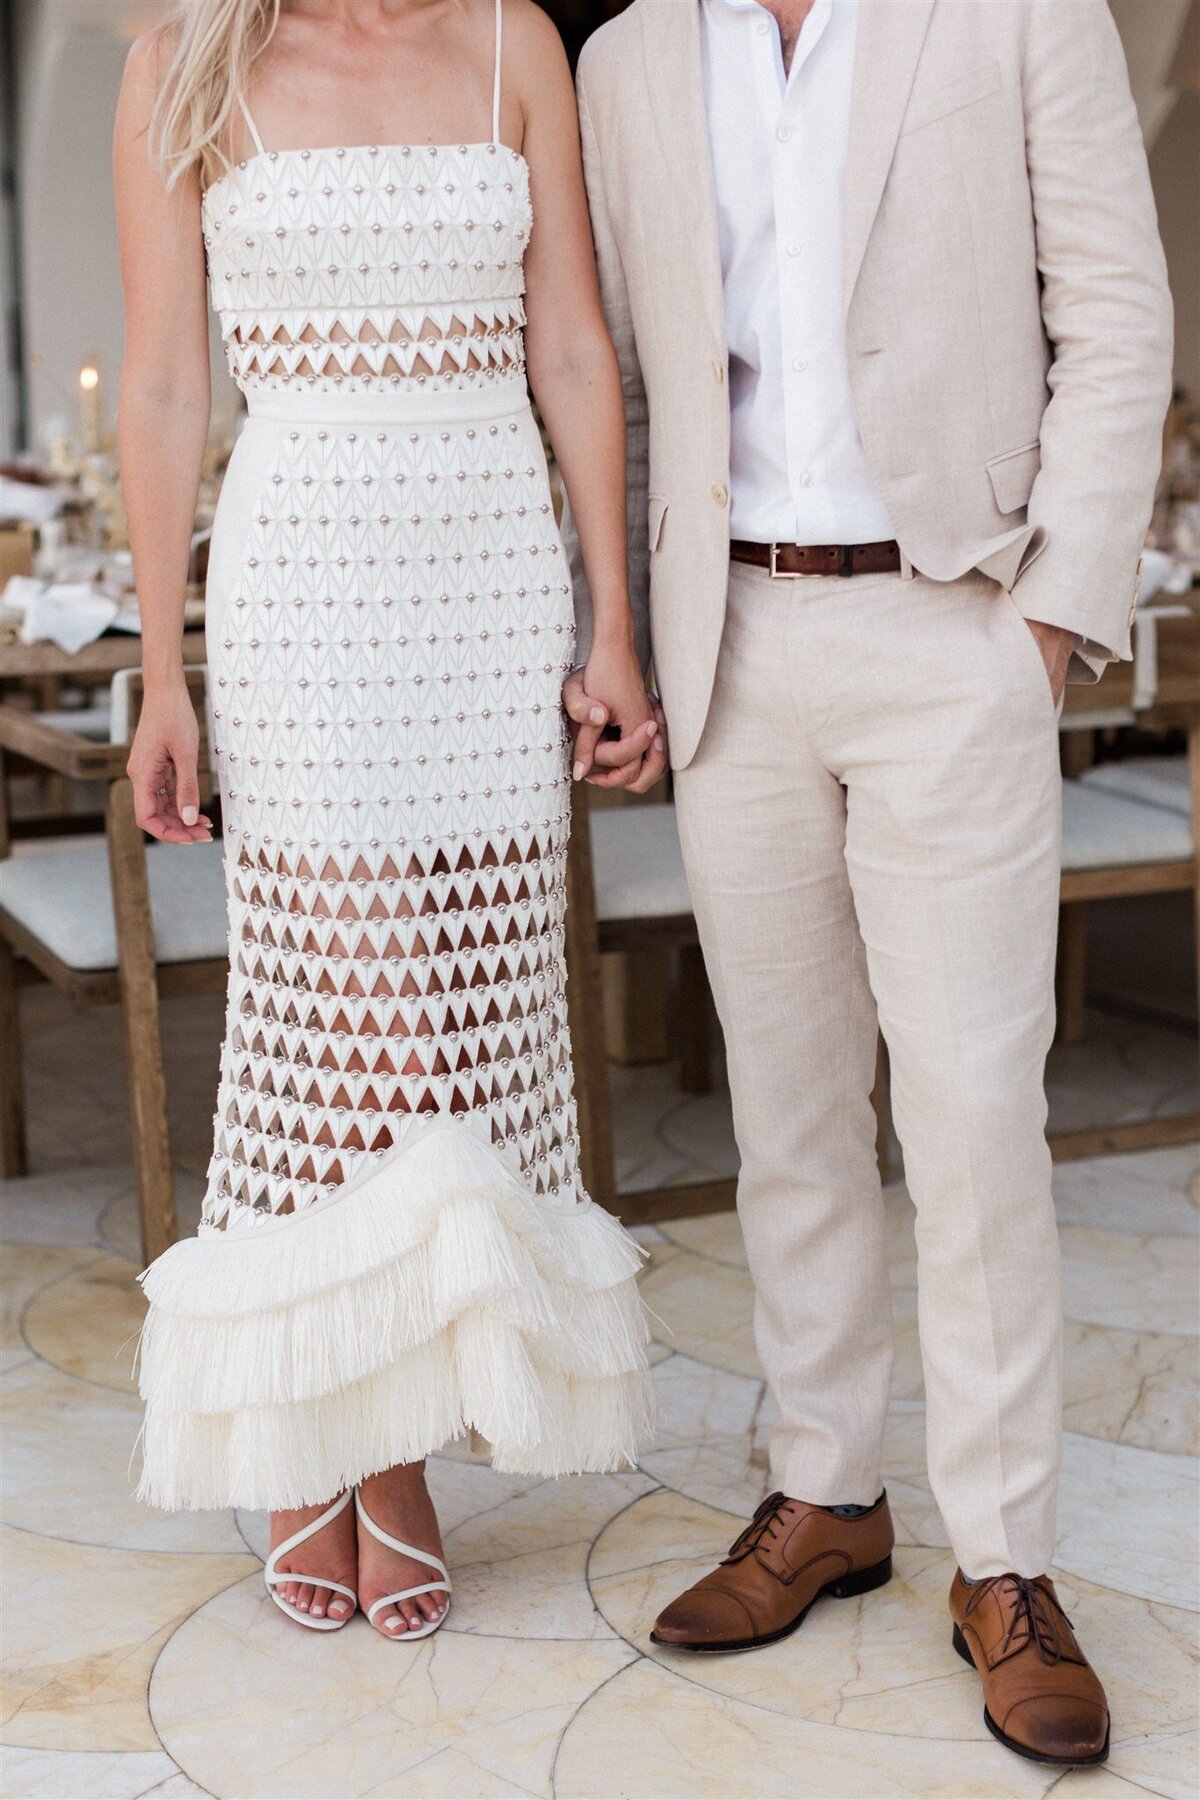 Arbol Cabo Rehearsal Dinner-Valorie Darling Photography-DF1A5879